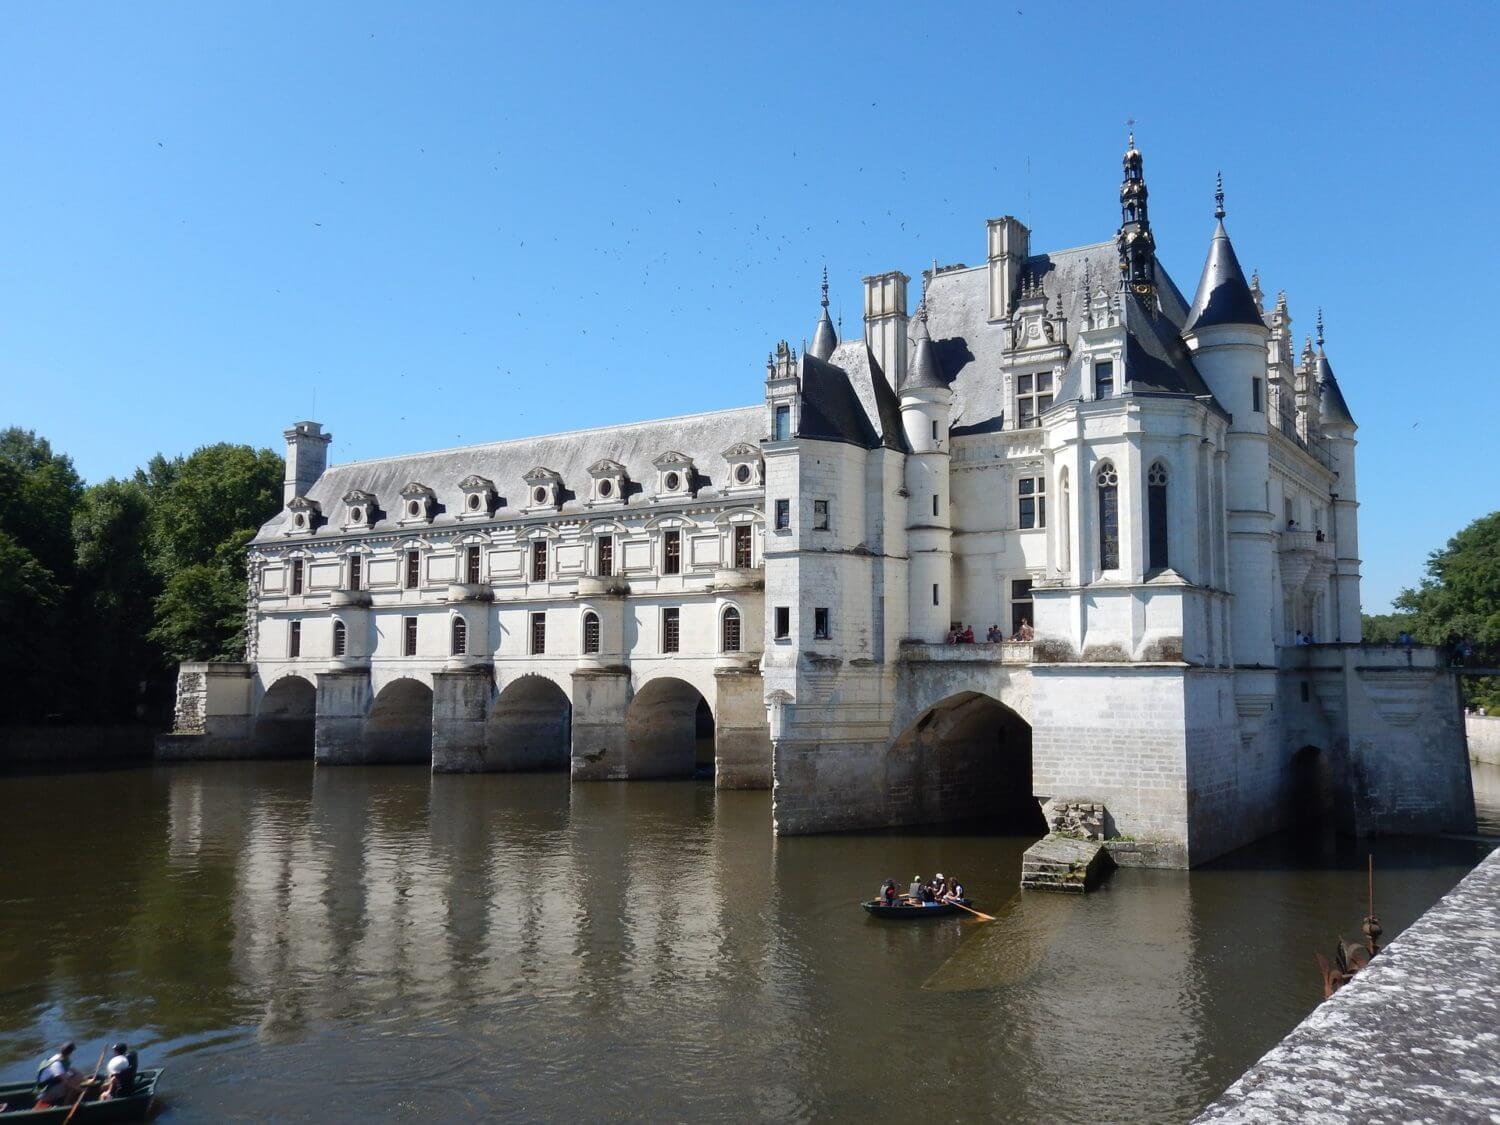 Chenonceau Castle - Image by Laure GREGOIRE from Pixabay